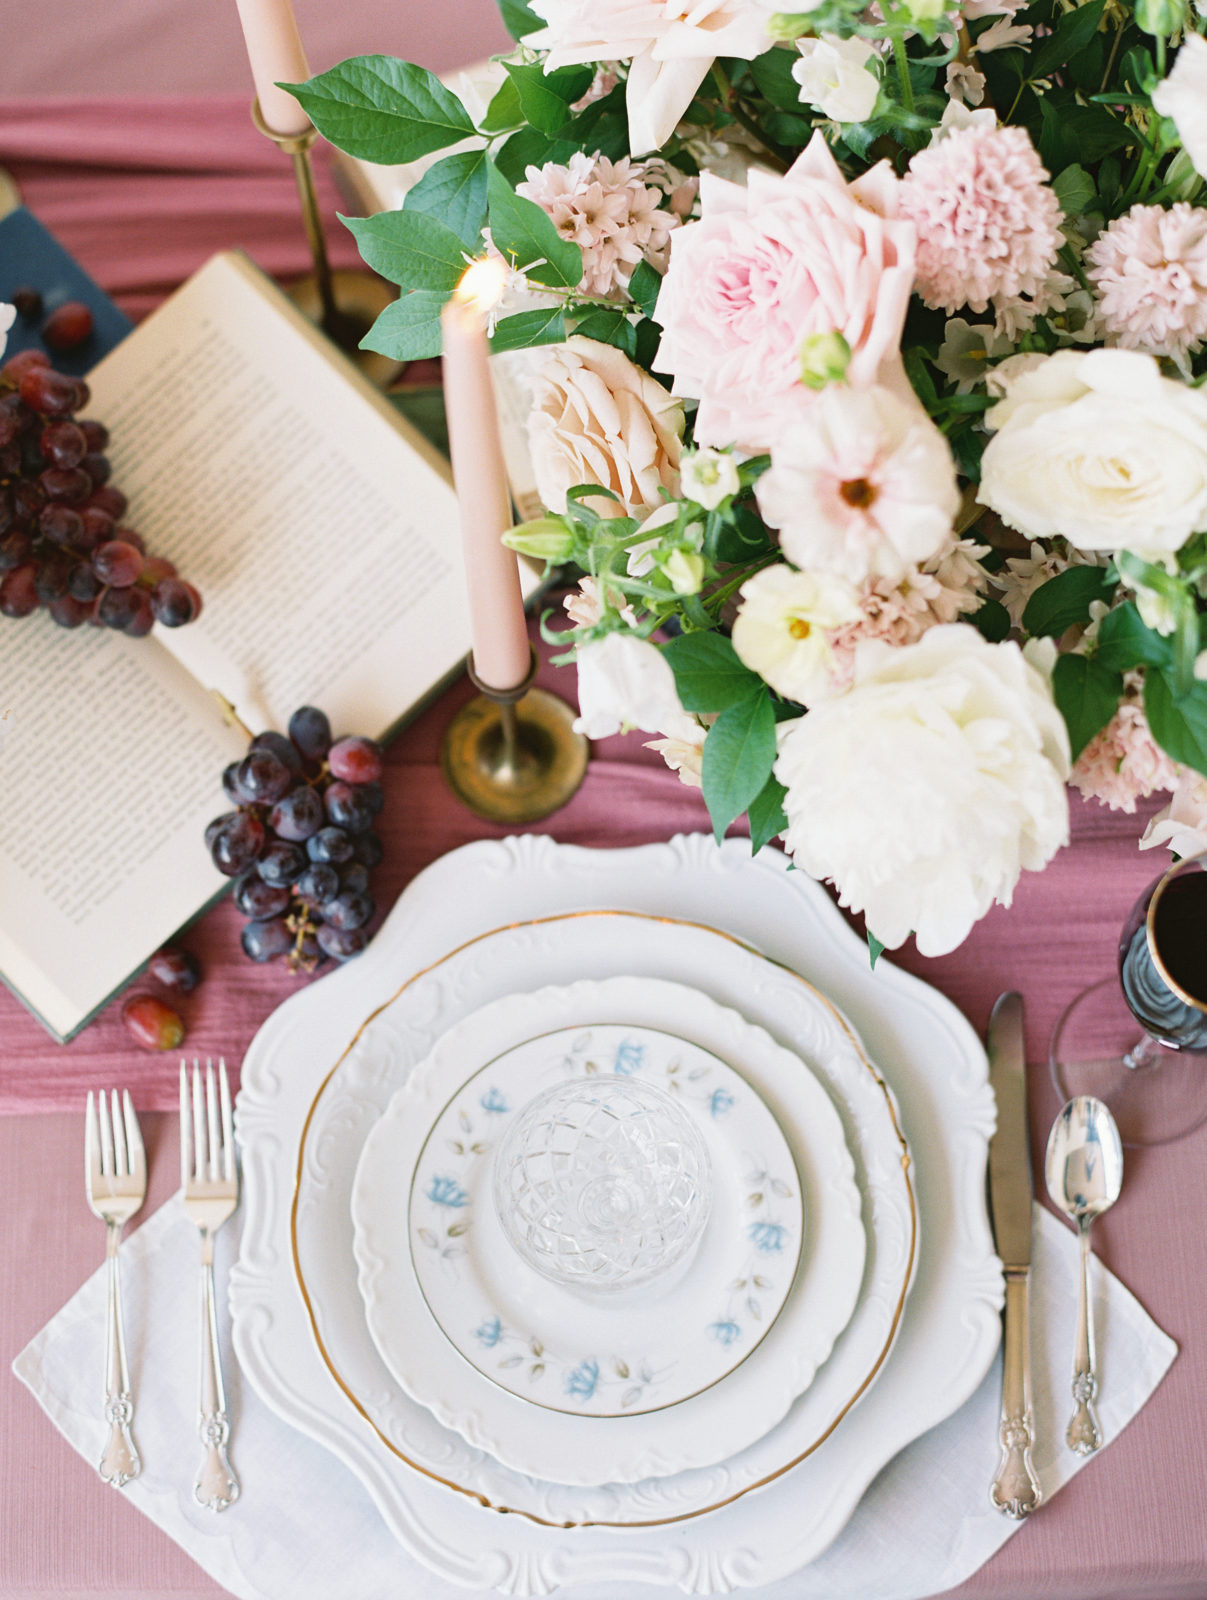 May Wedding Flowers featuring blush and dusty rose blooms in Kansas City, Missouri